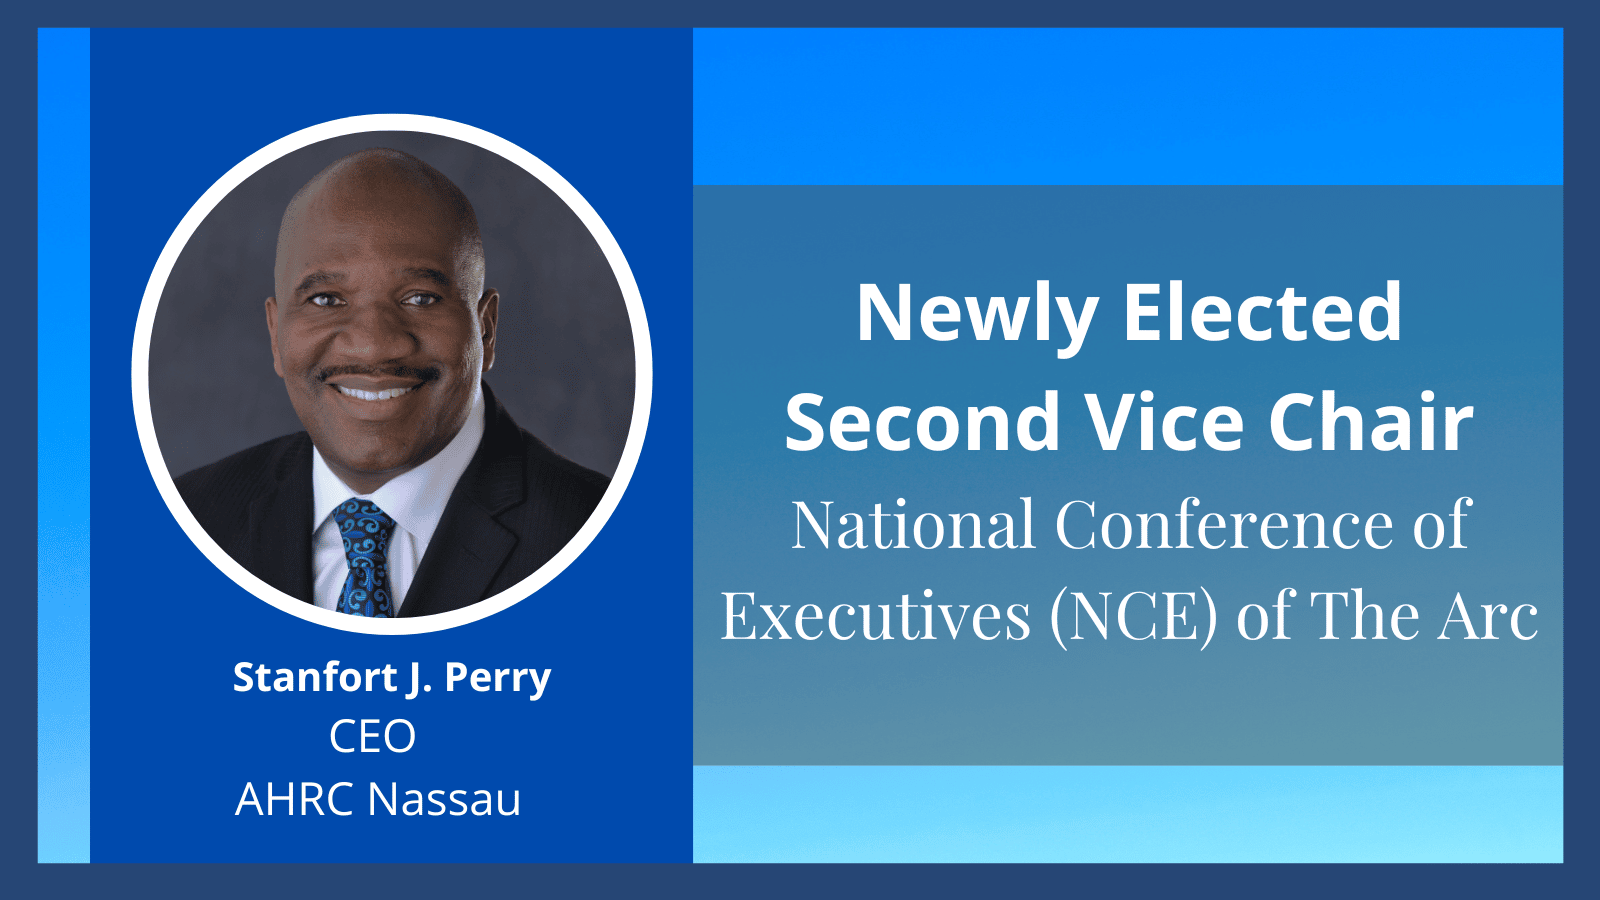 Stanfort J. Perry, CEO, AHRC Nassau, Newly Elected Second Vice Chair, National Council of Executives (NCE), of The Arc